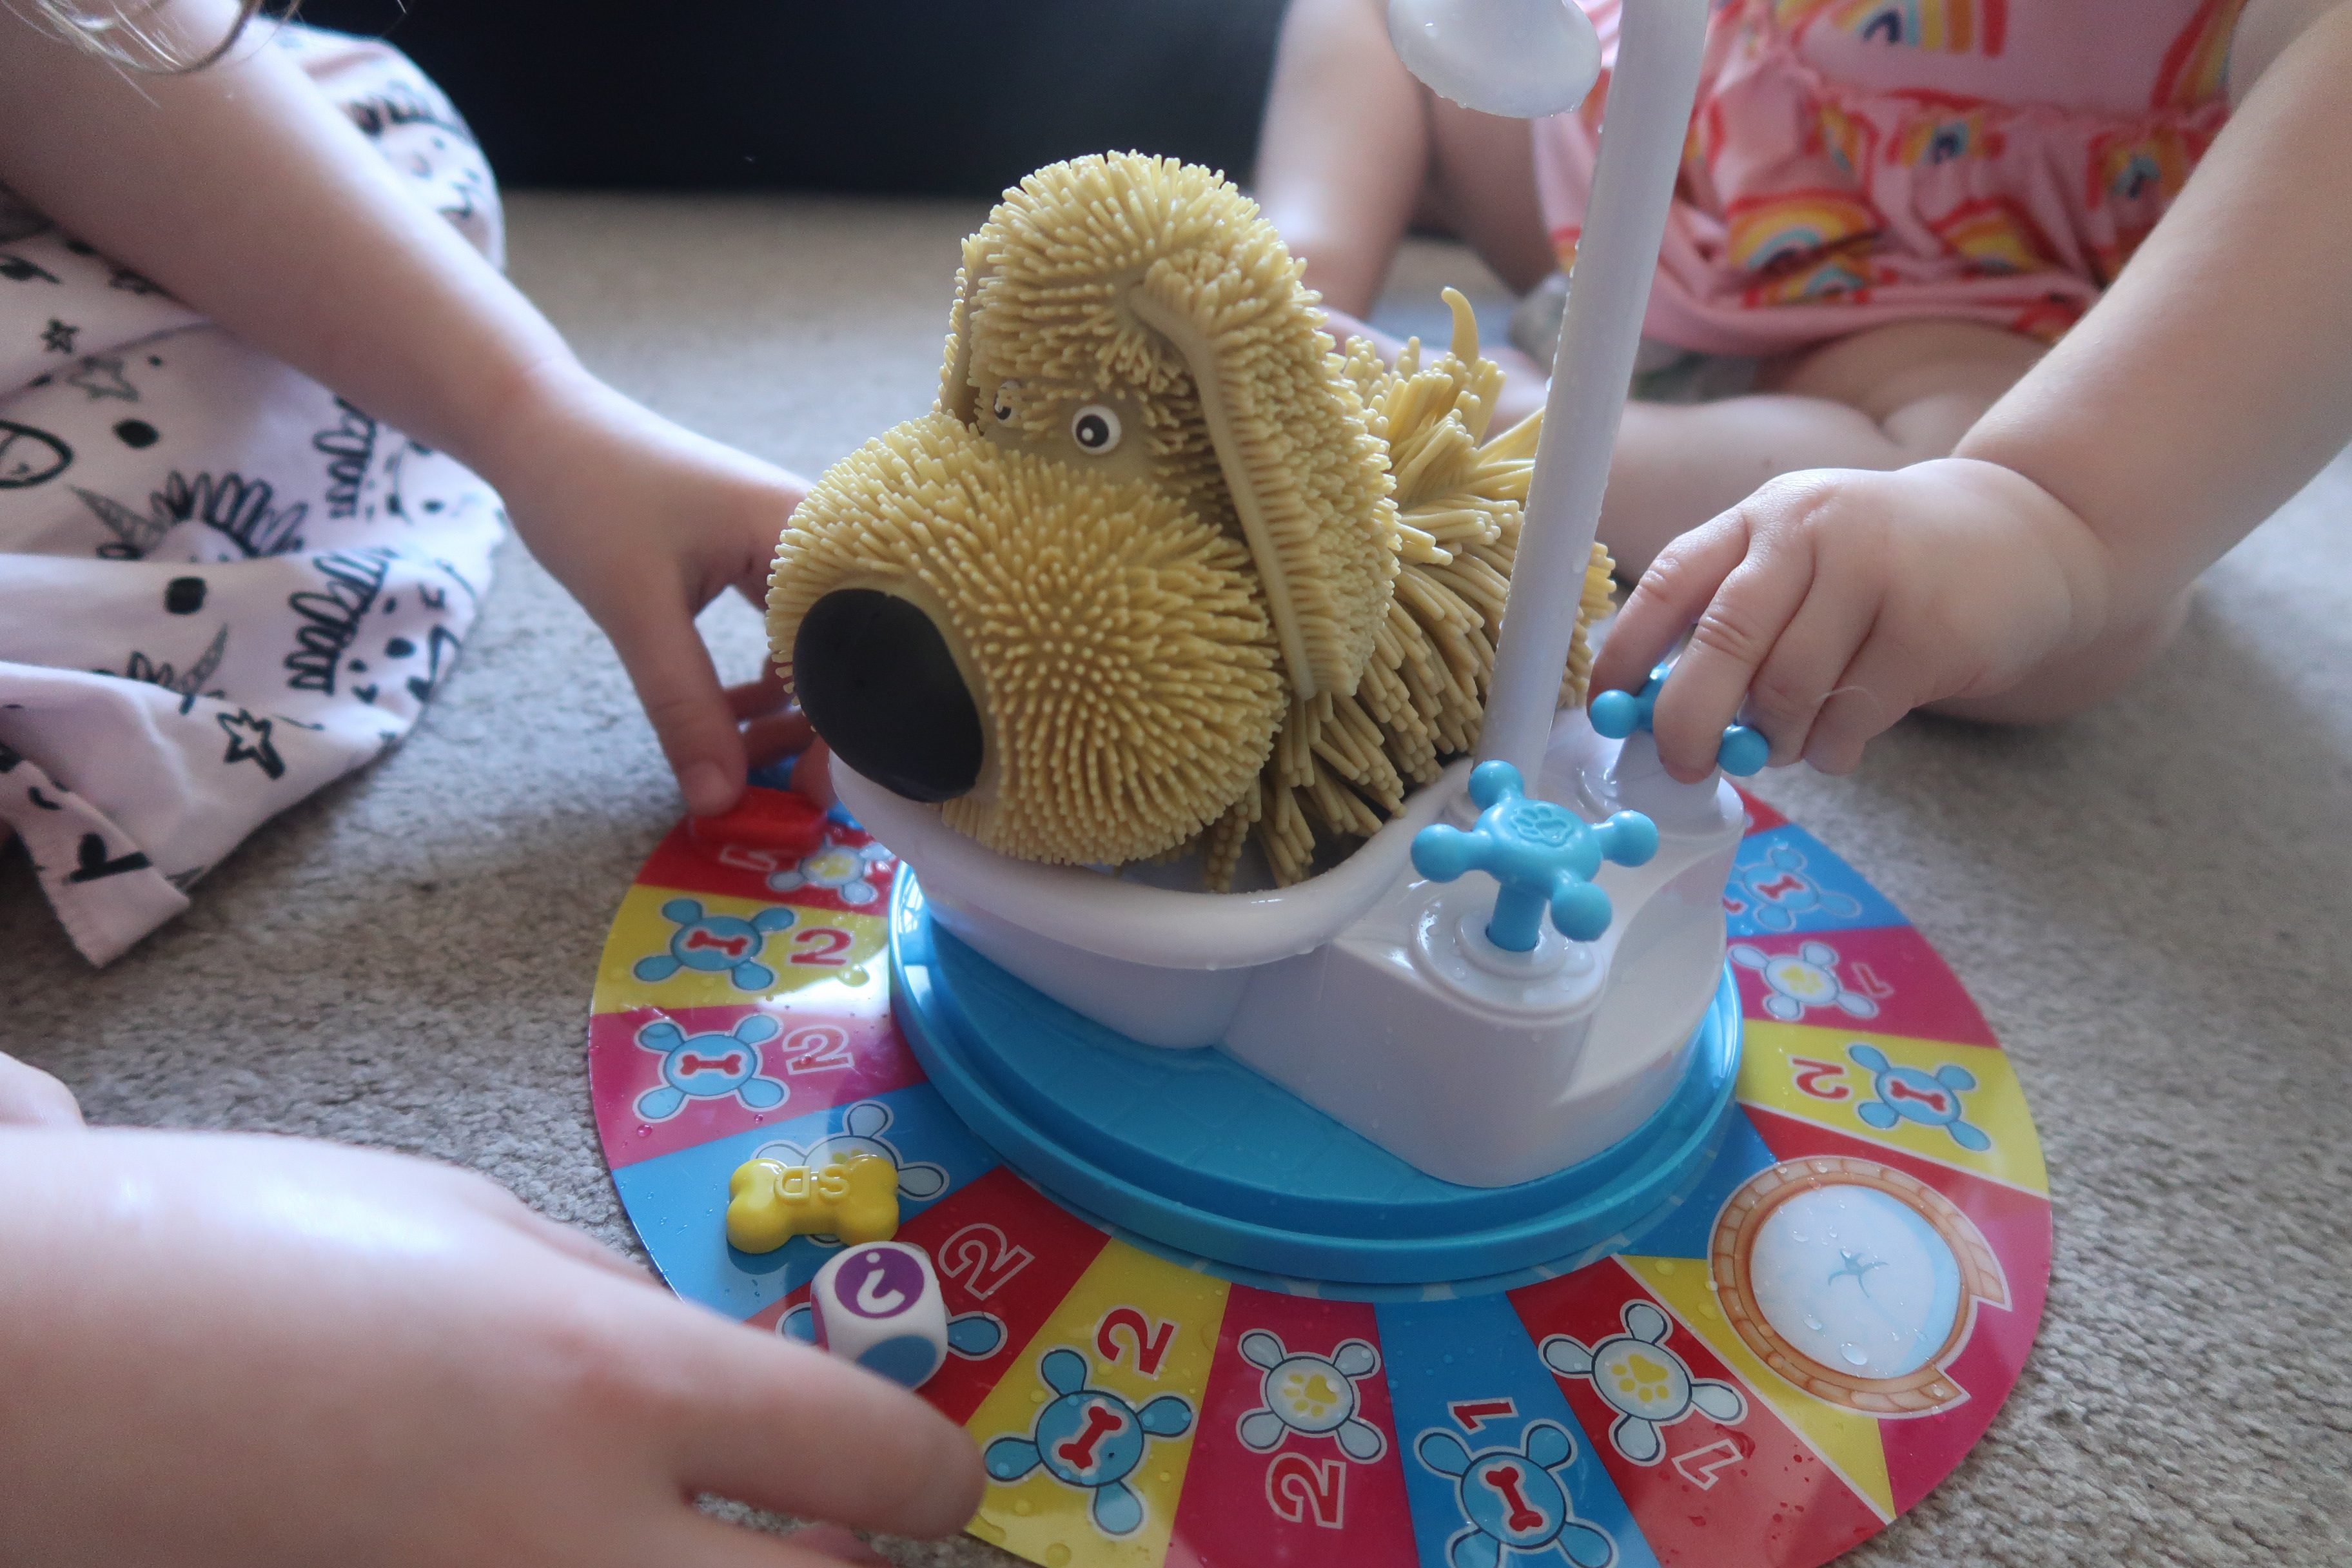 Celebrating National Pet Month with Soggy Doggy - Real Mum Reviews